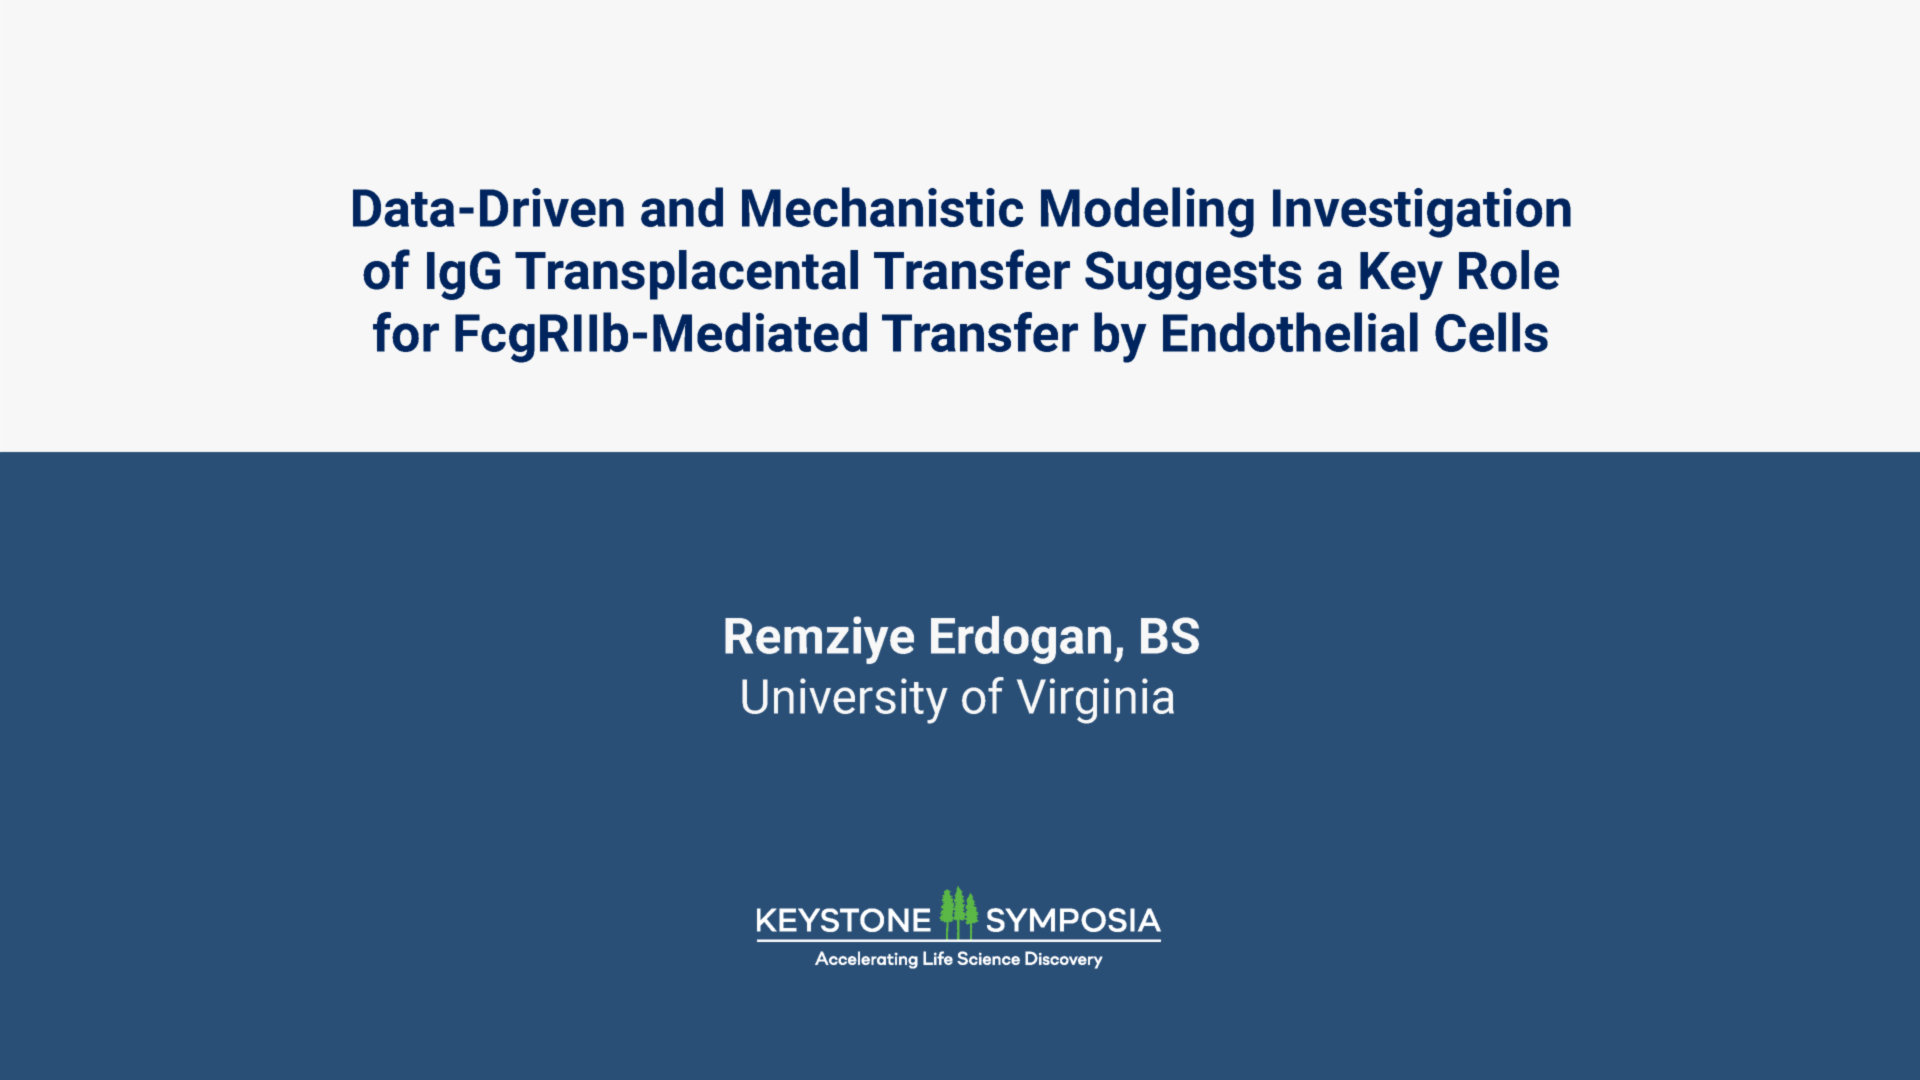 A data-driven and mechanistic modeling investigation of IgG transplacental transfer suggests a key role for FcgRIIb-mediated transfer by endothelial cells icon